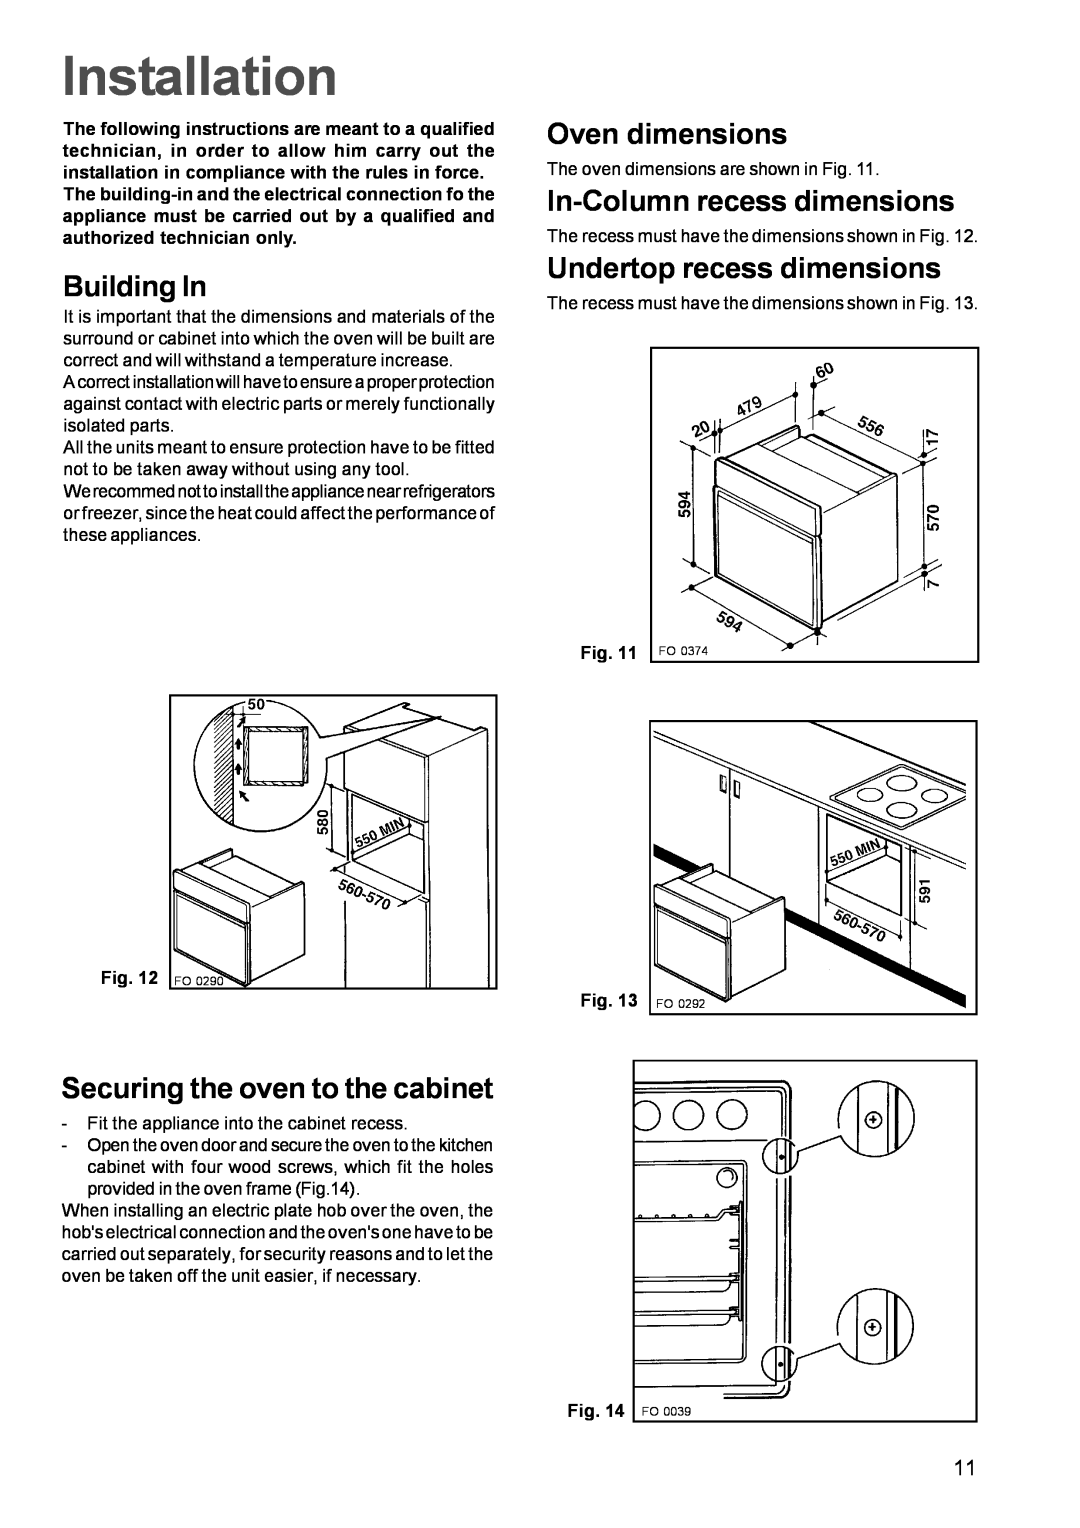 Zanussi ZBF 610 Installation, Building In, Securing the oven to the cabinet, Oven dimensions, In-Column recess dimensions 